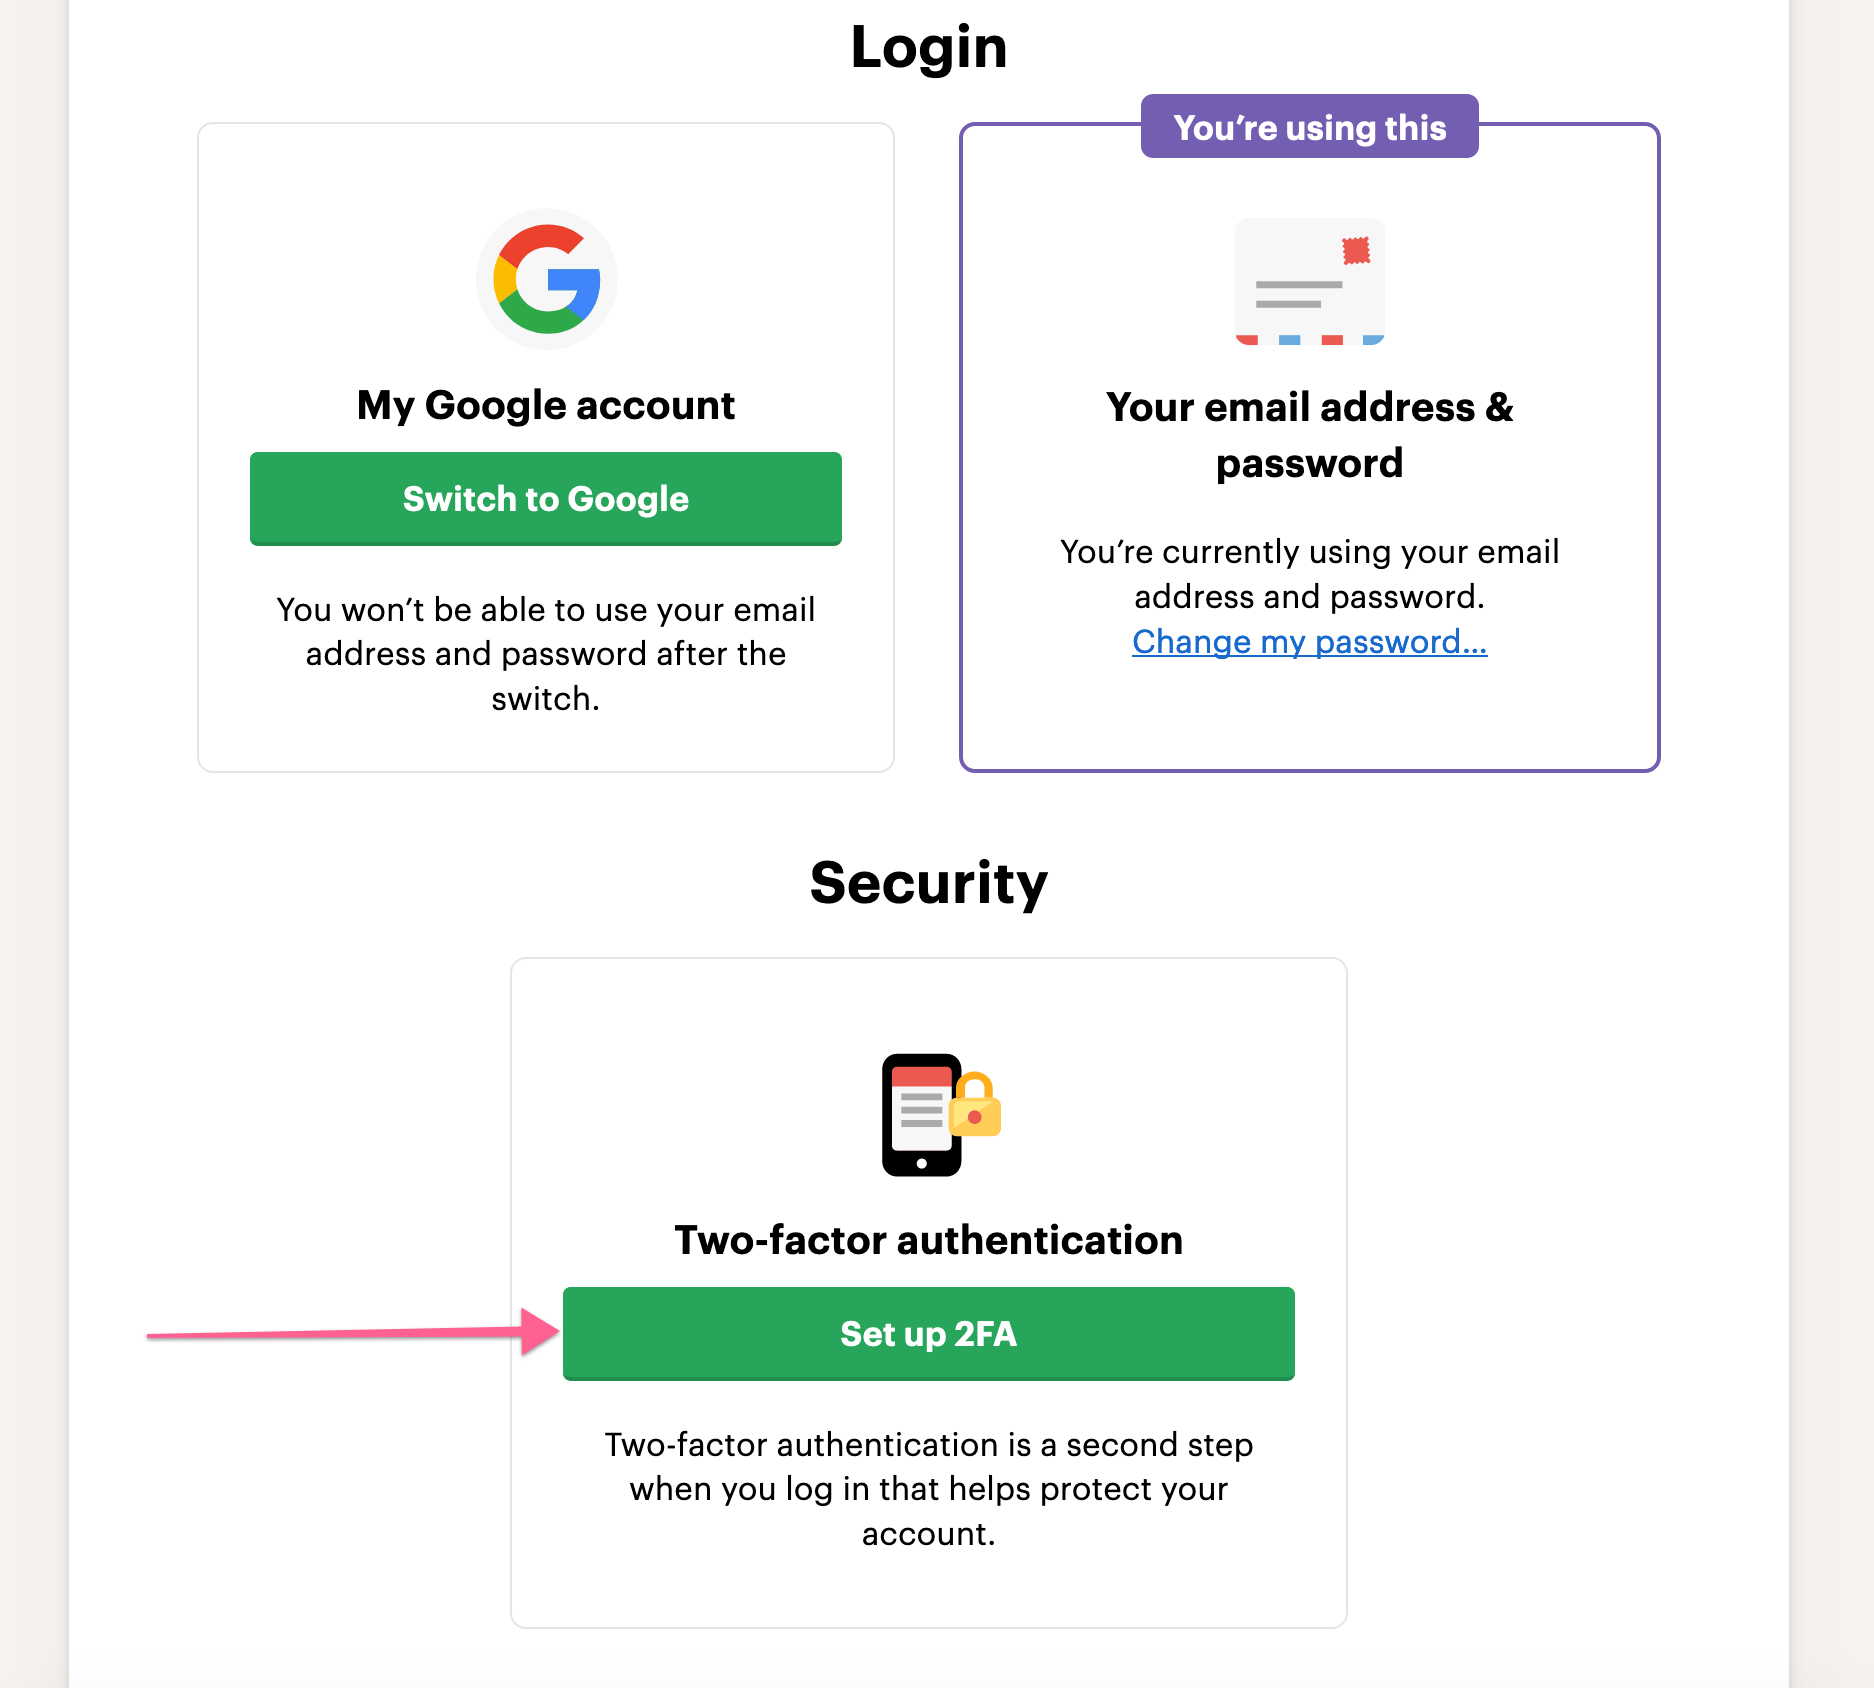 Setup two-factor authentication